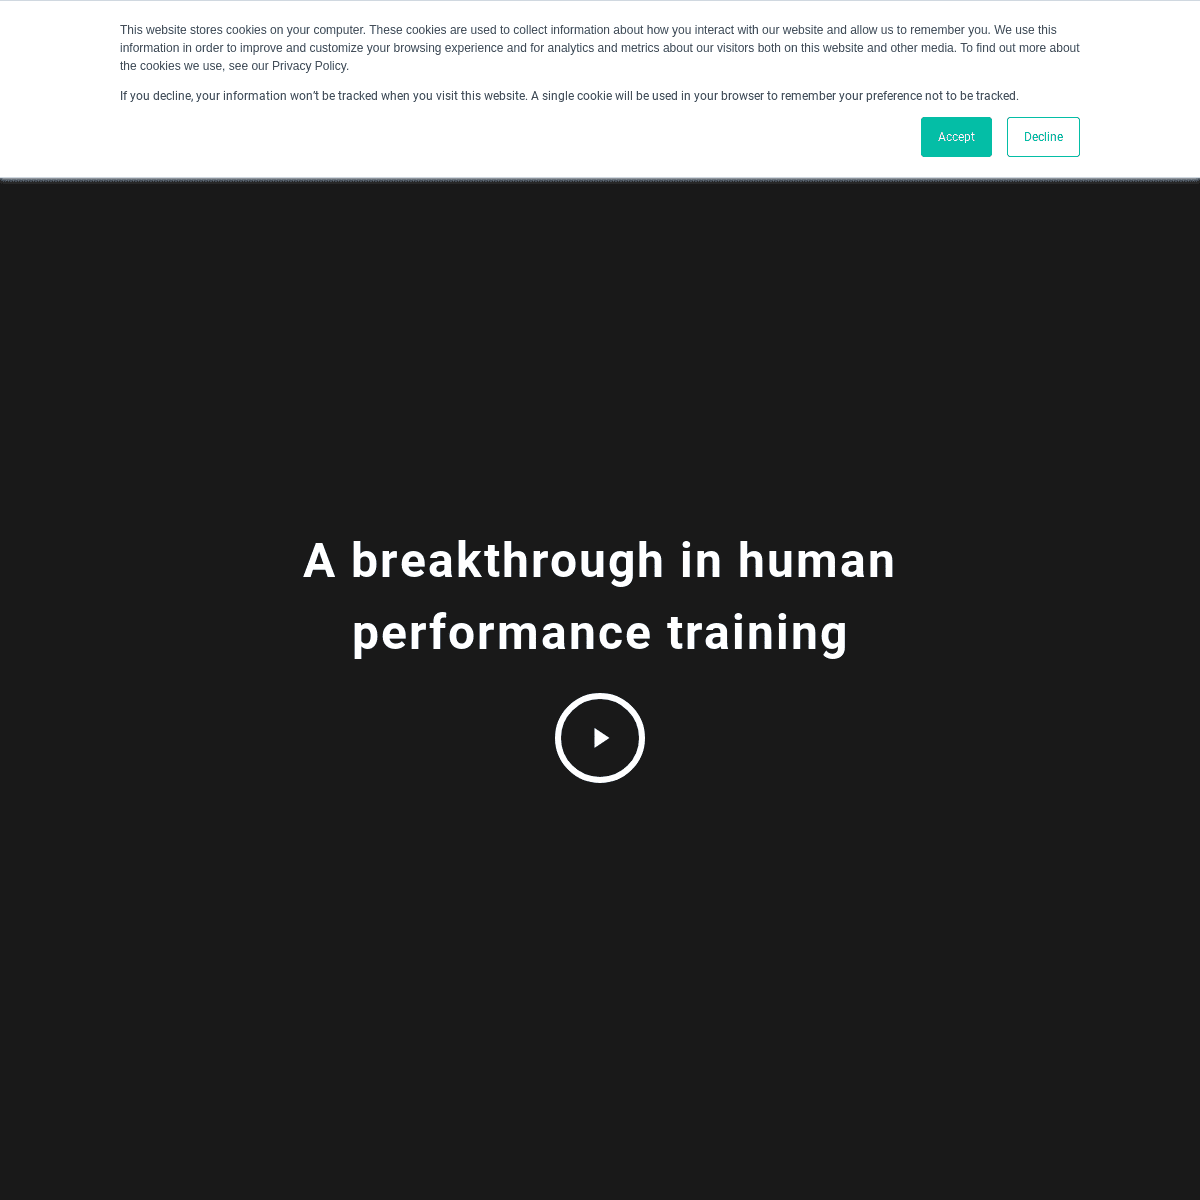 A complete backup of https://teslasuit.io